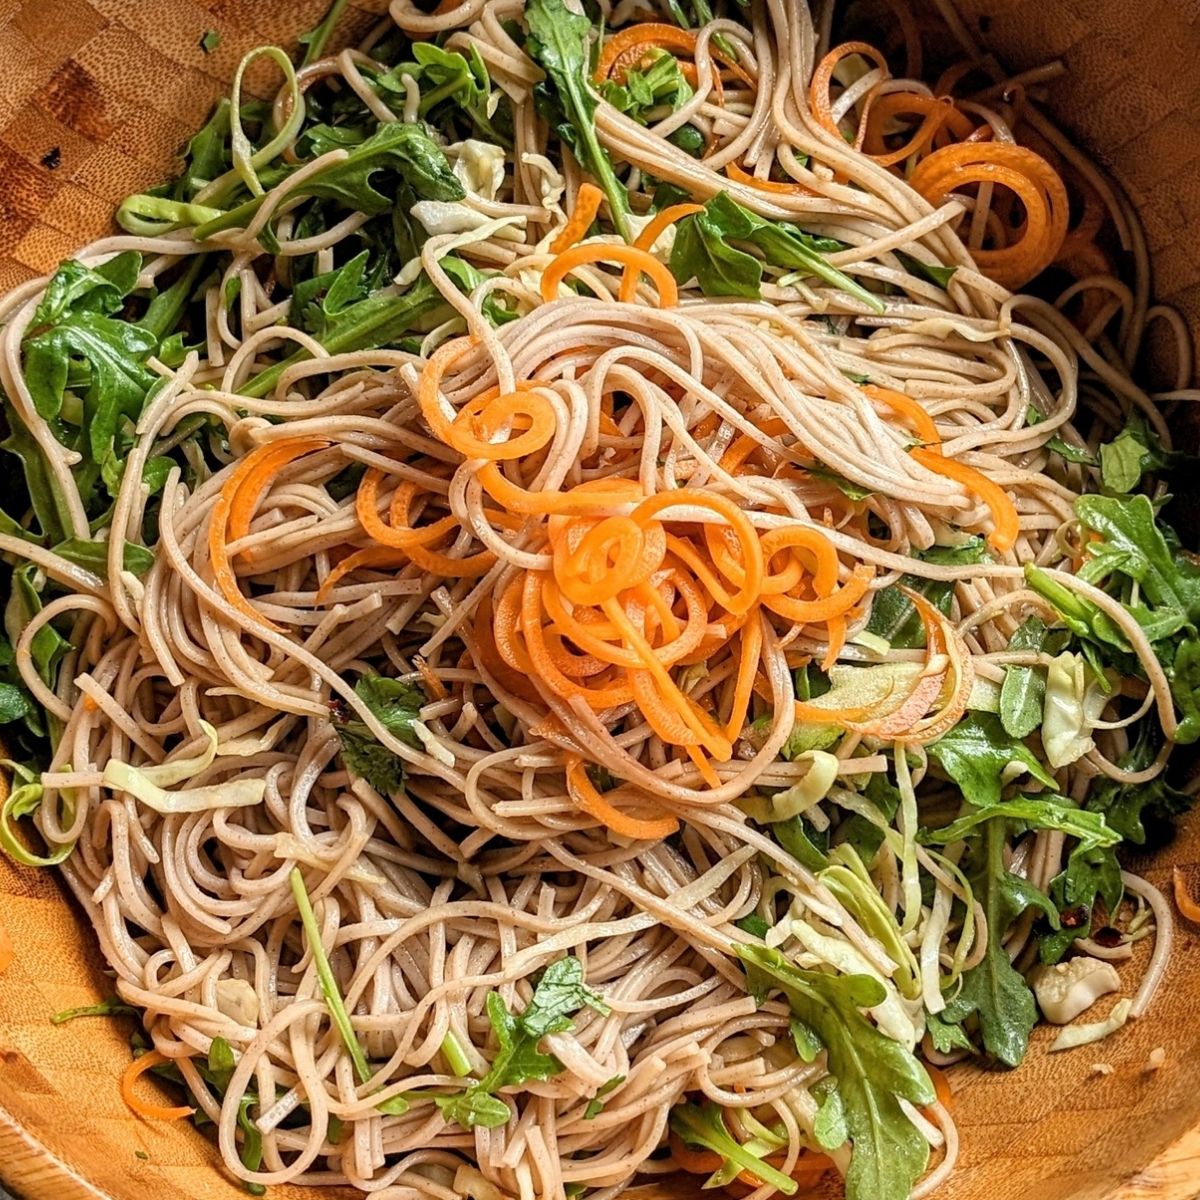 a large wooden bowl full of spicy soba noodle salad with veggies and a tangy homemade lime dressing